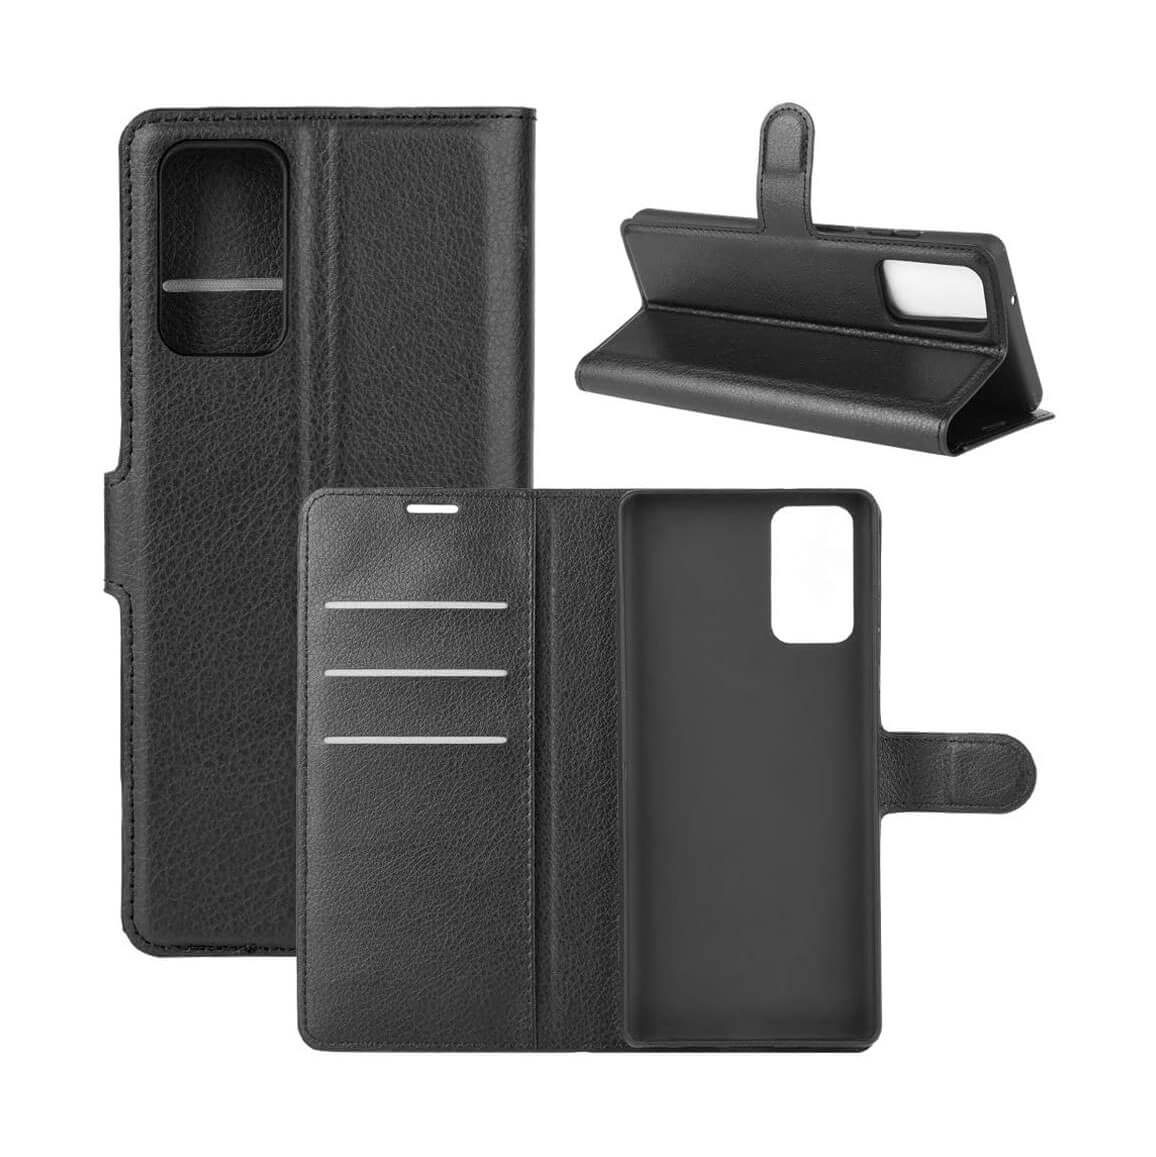 PU Leather Wallet Cover For Samsung Galaxy Note 20 / Note 20 5G Case Holder Card Slots Black